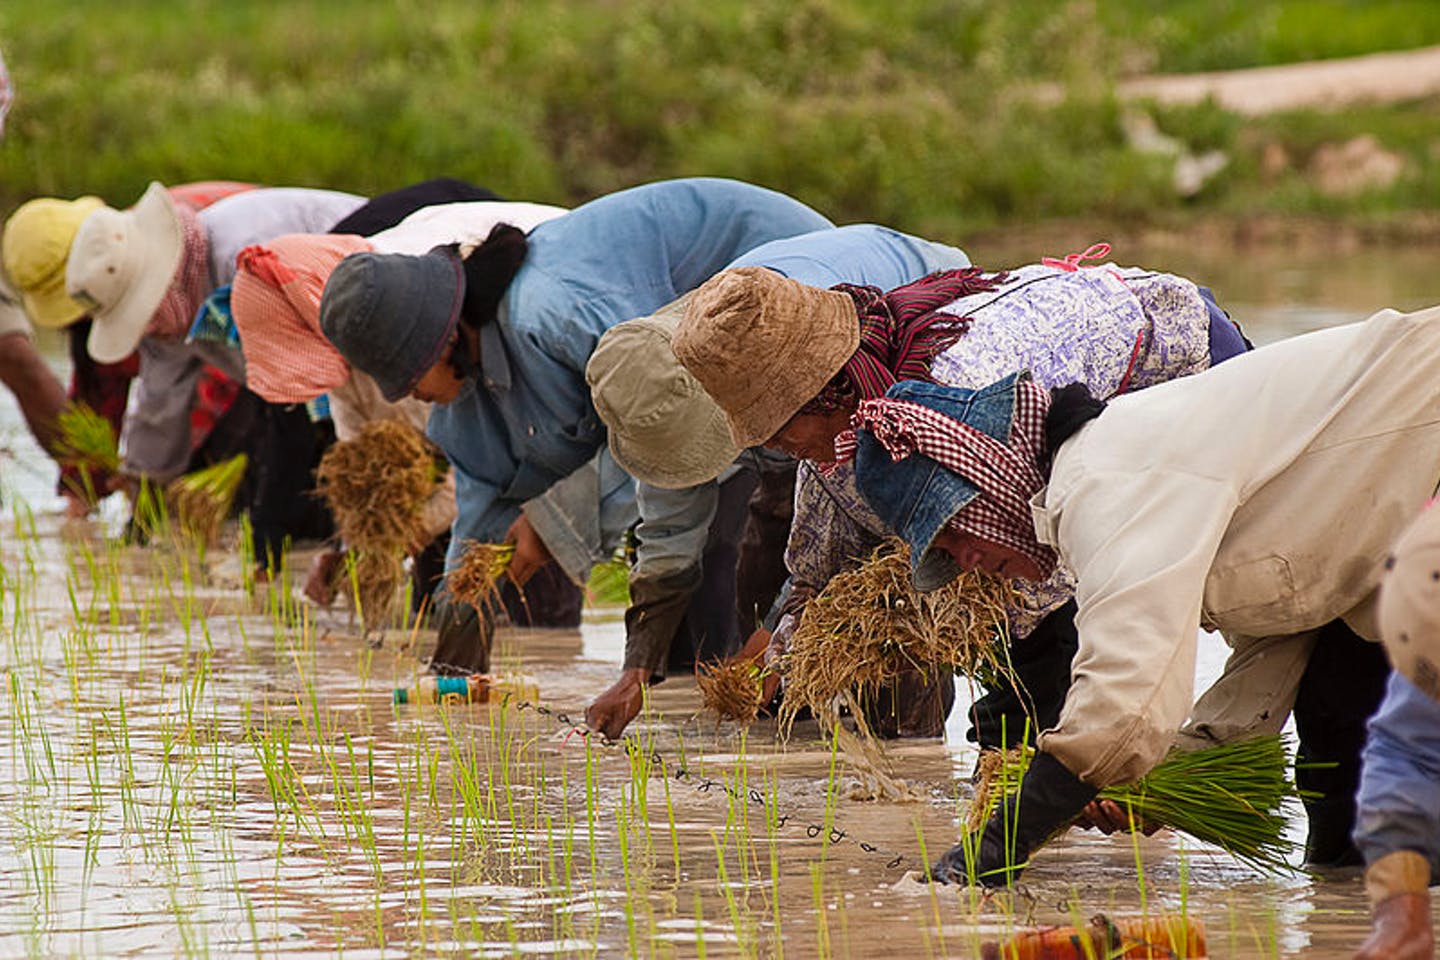 Cambodian farmers planting rice. (Image: Brad Collis , CC BY 2.0)